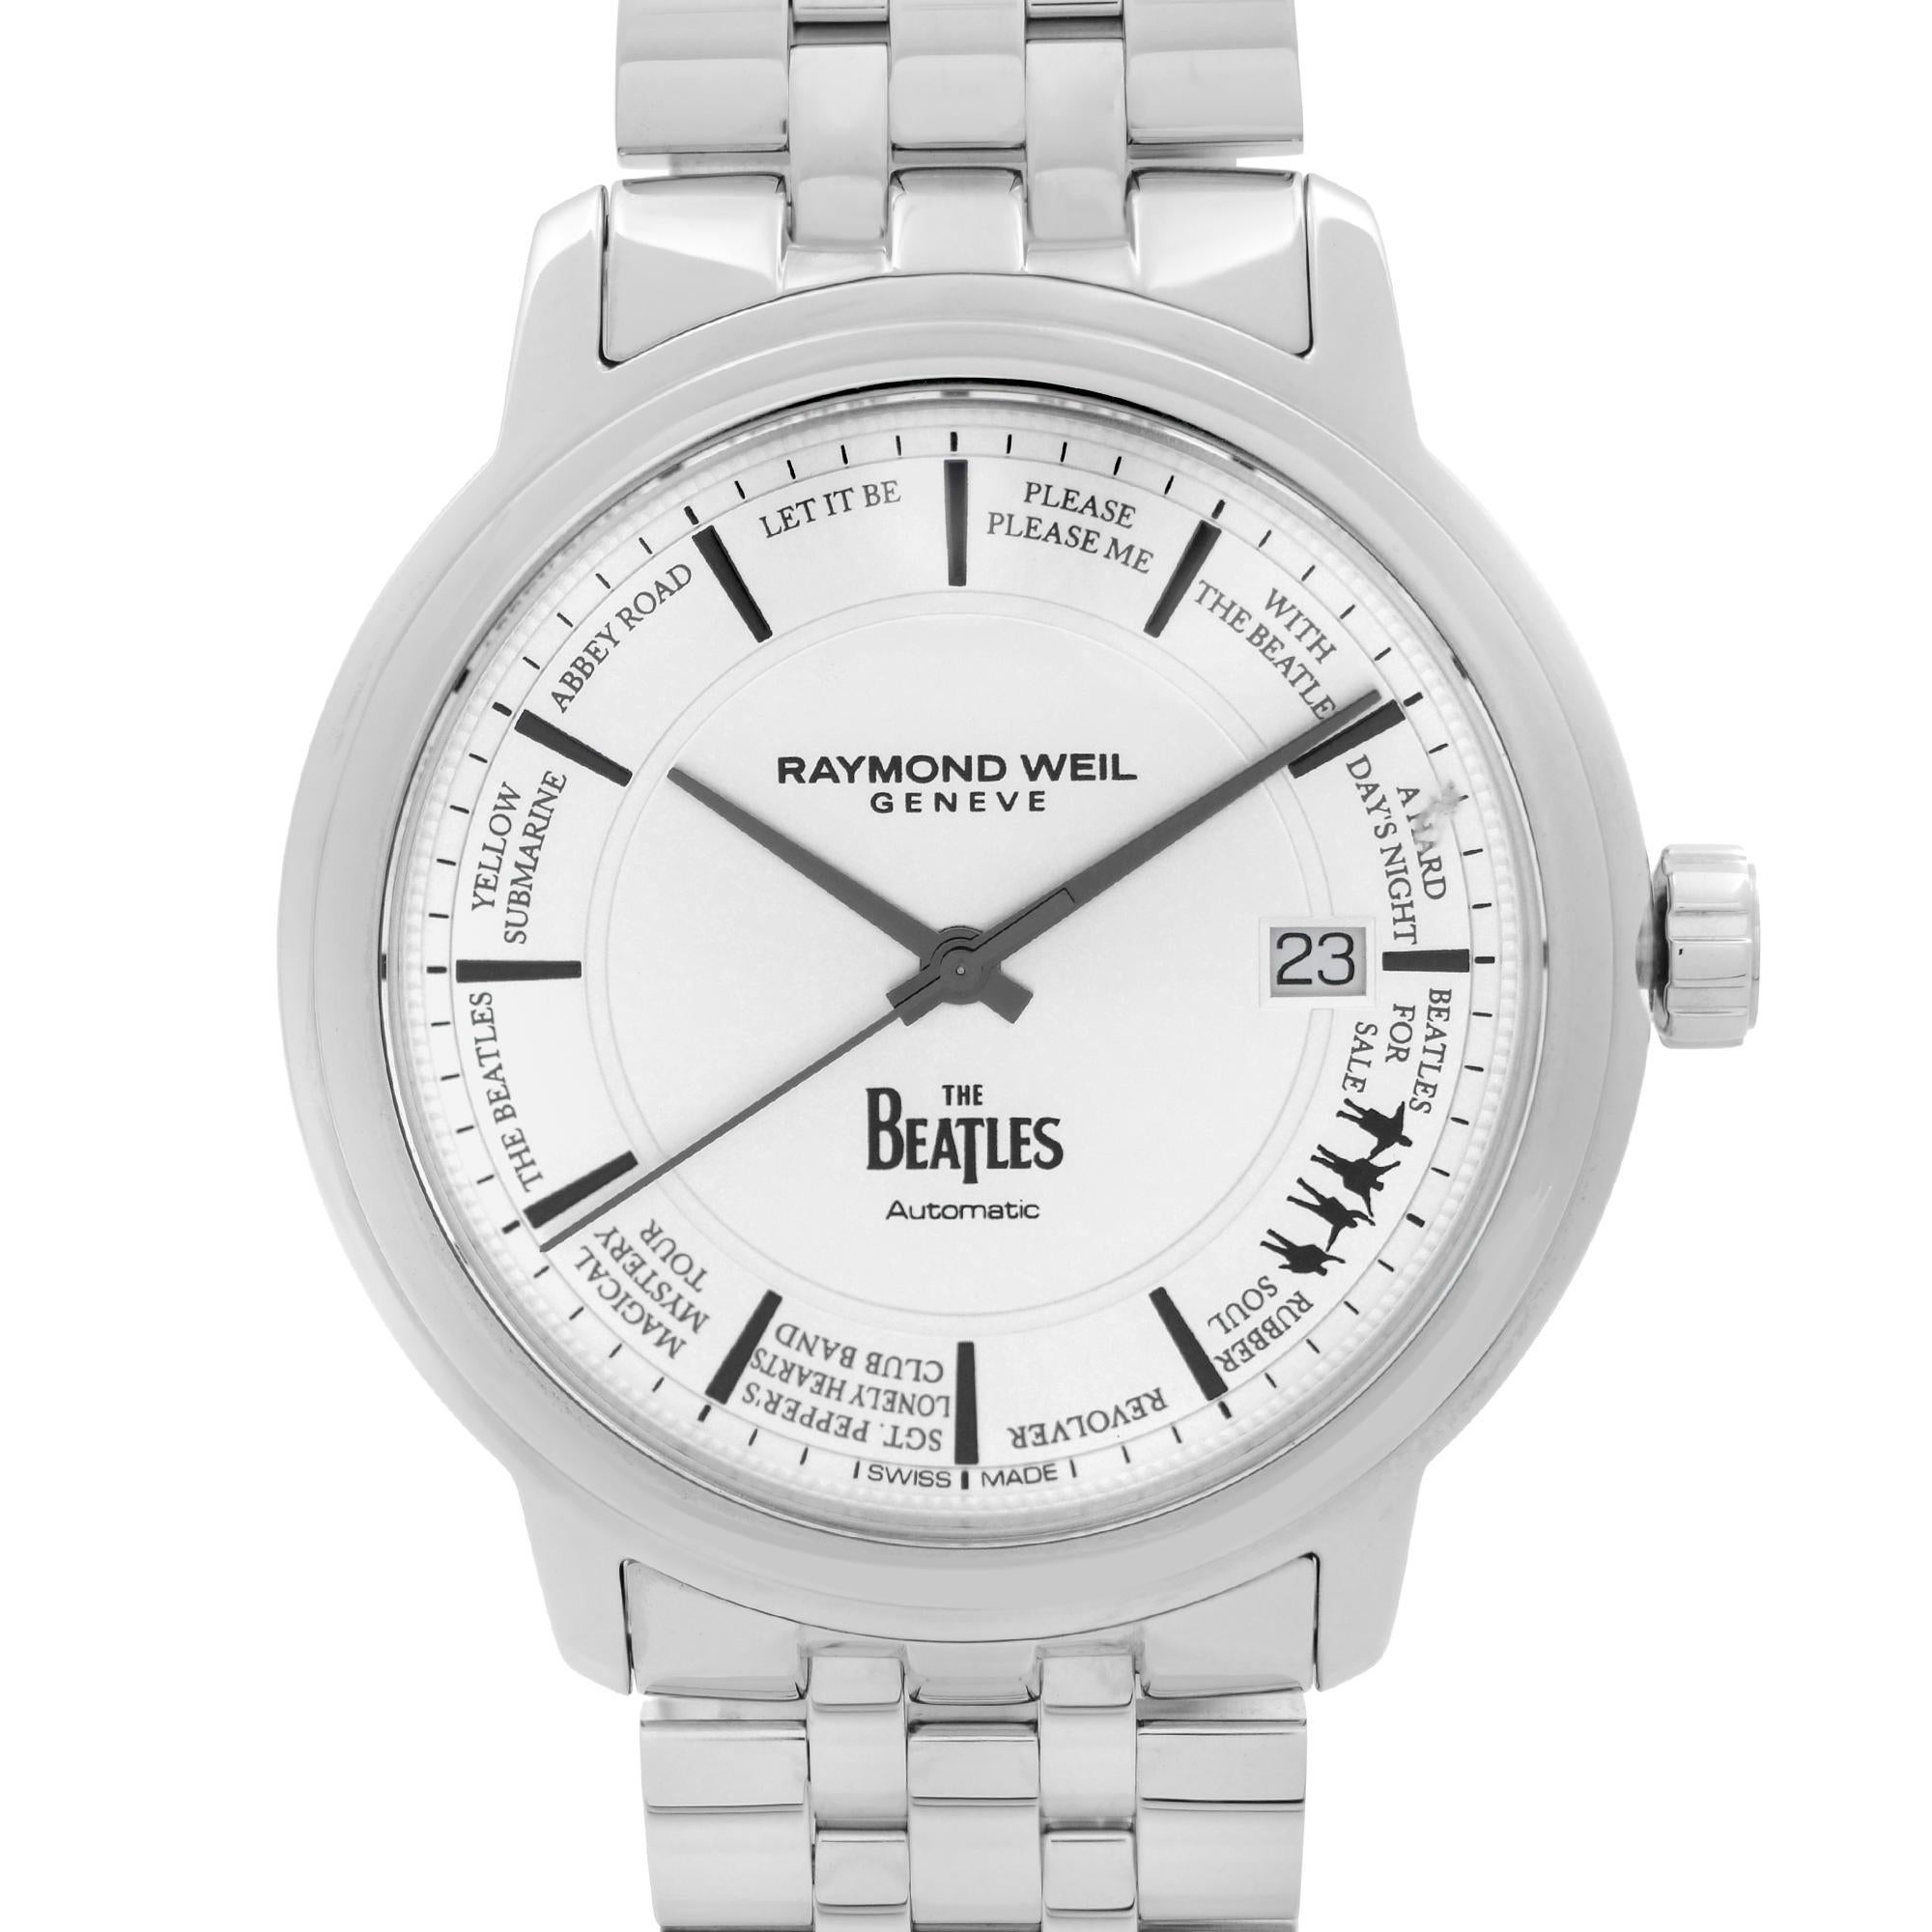 Never Worn Raymond Weil Maestro Beatles Edition Steel Silver Dial Men's Watch 2237-ST-BEAT1. This Beautiful Timepiece Features: Stainless Steel Case and Bracelet, Fixed Stainless Steel Bezel, Silver Dial with Black Hands, And Index Hour Markers.